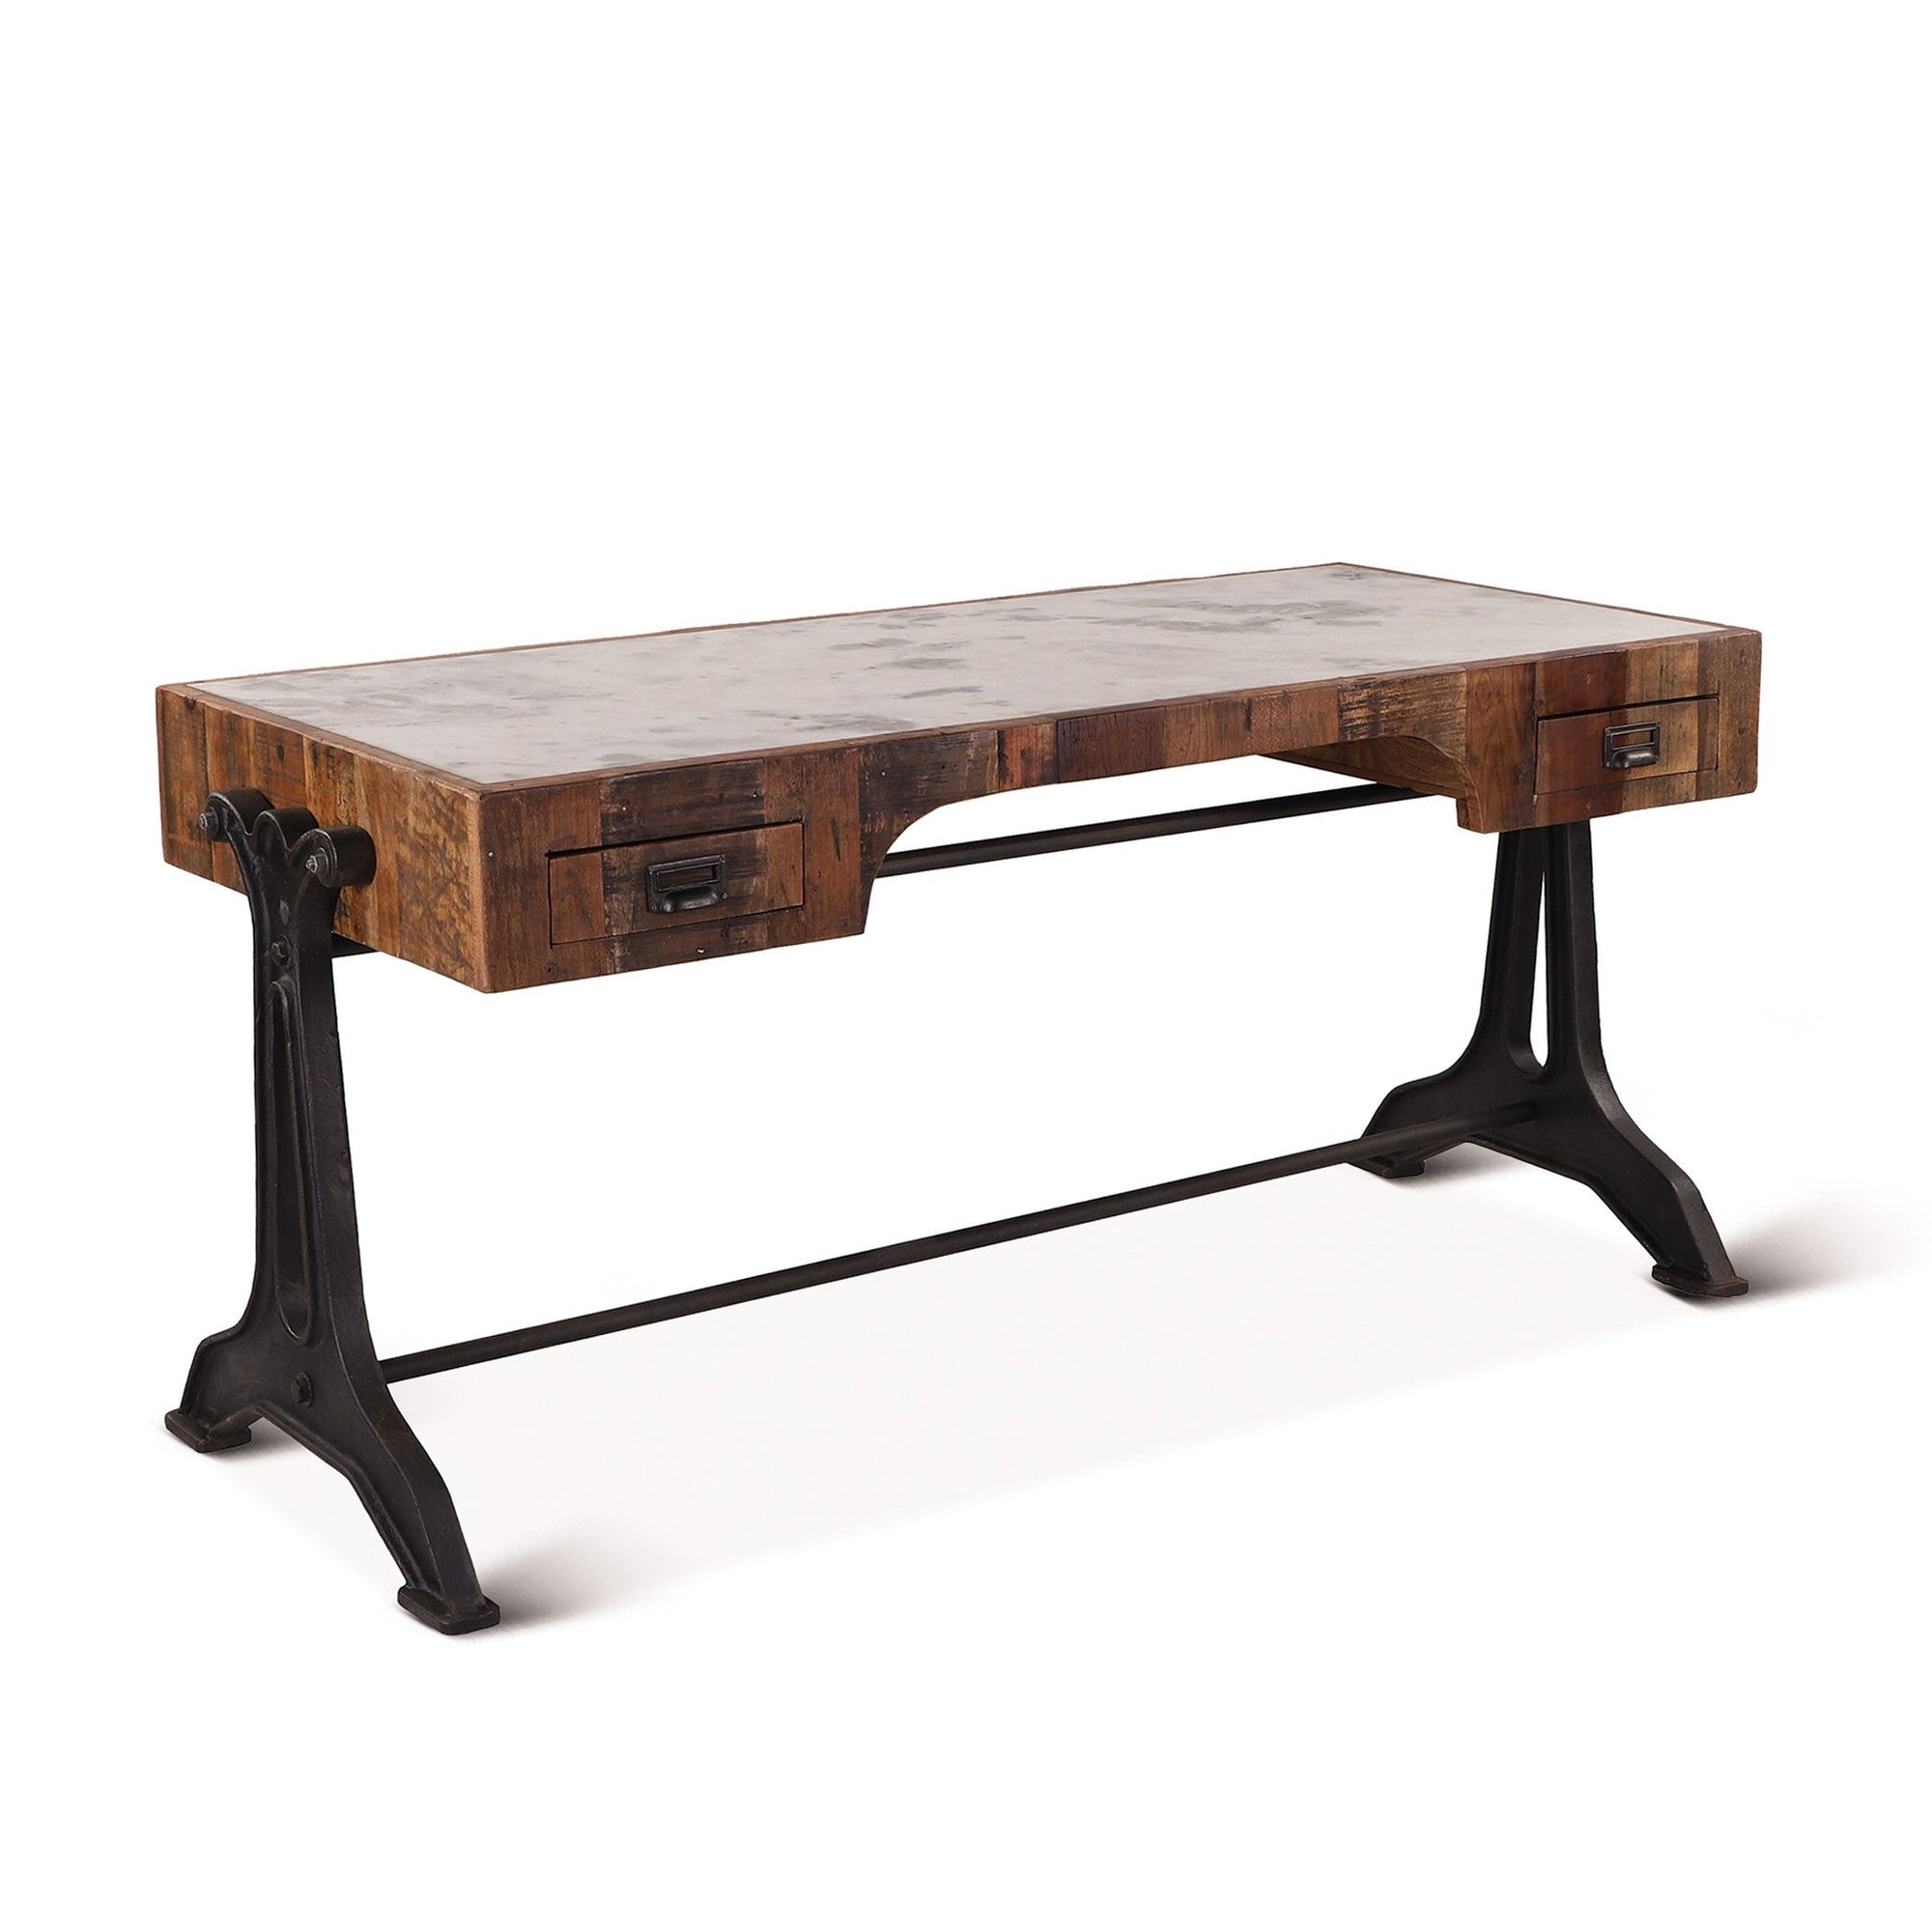 Reclaimed Iron Rustic Desk with Marble Top - Furniture on Main